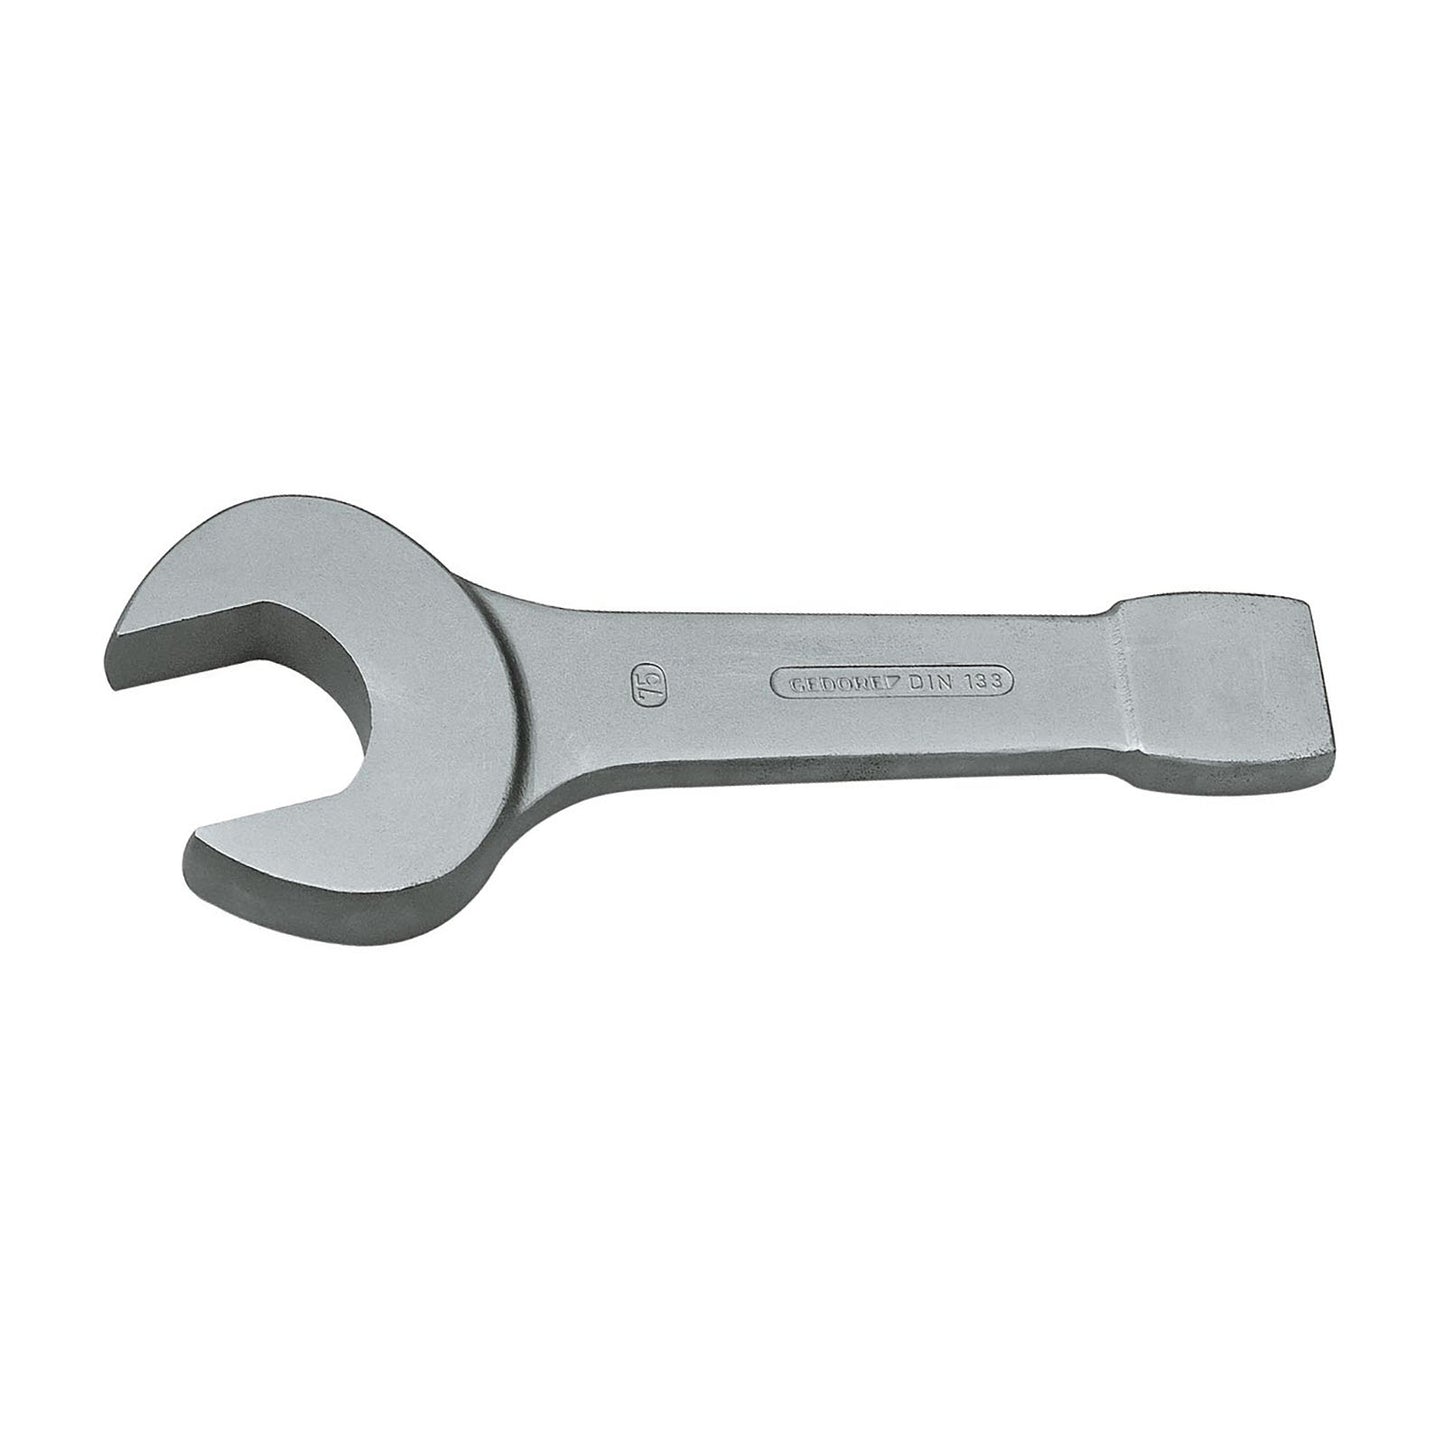 GEDORE 133 105 - Open Strike Wrench, 105mm (6401900)